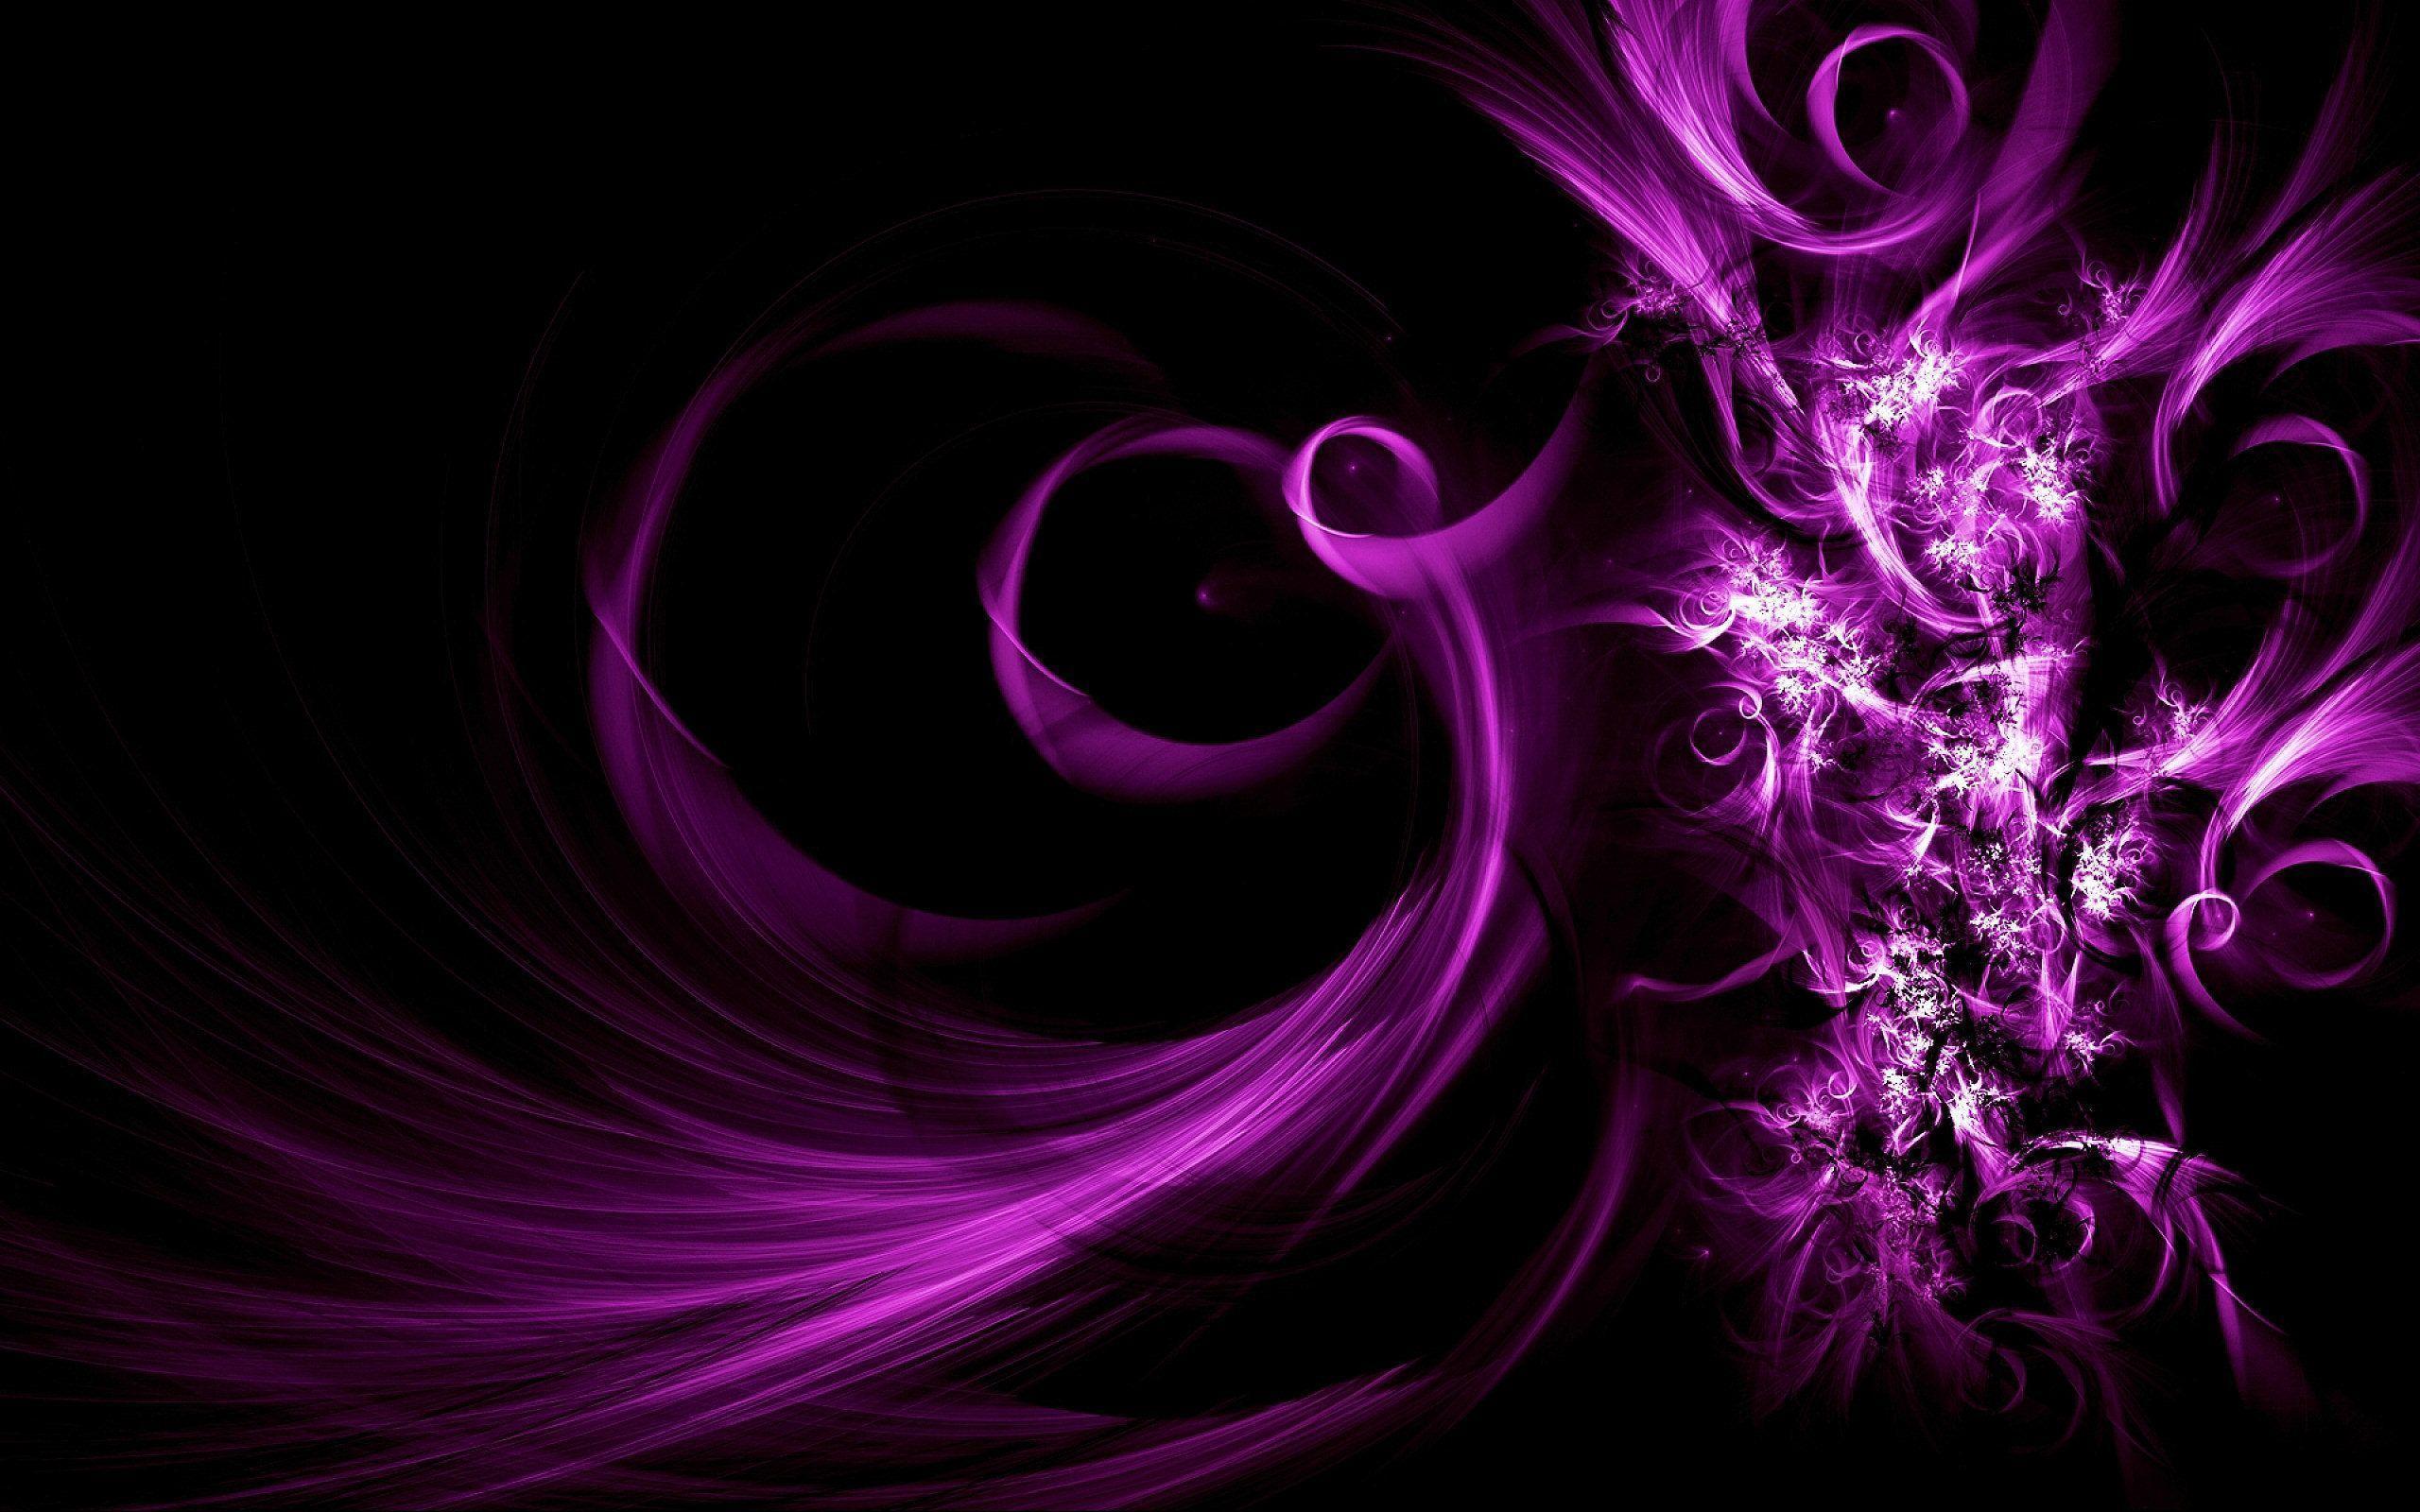 Wallpaper For > Purple And White Abstract Wallpaper